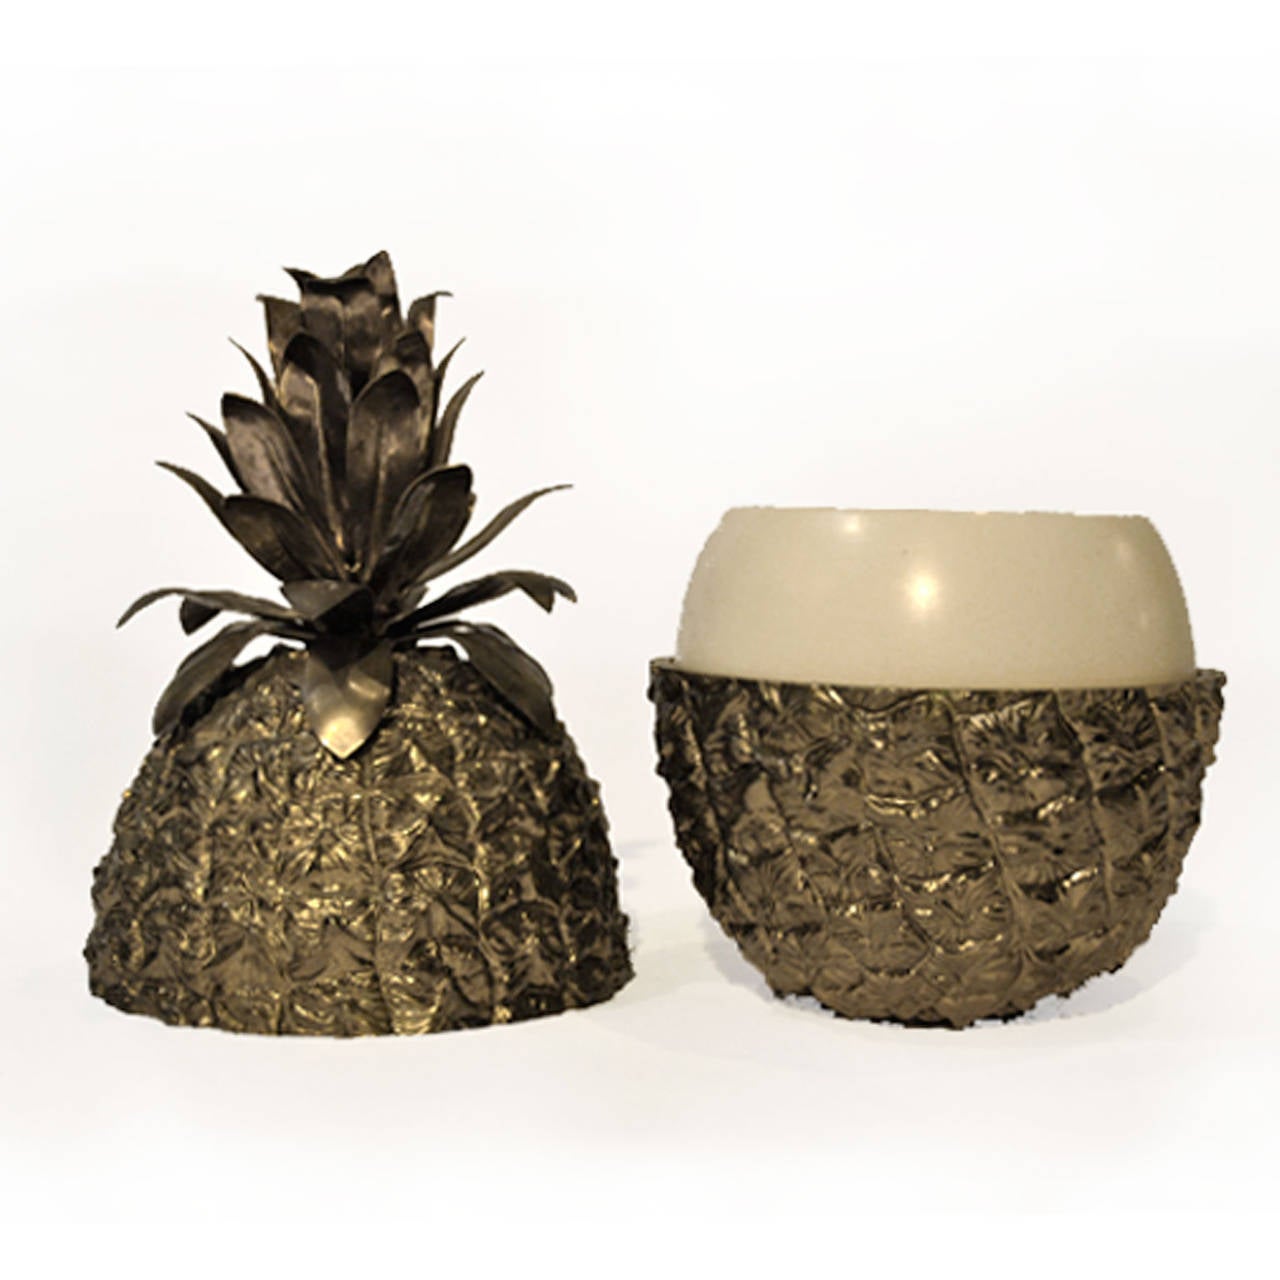 Pineapple shaker by the Turnwald collection international, Italy, 1970s. Measures: 18 x 35 (H) cm.